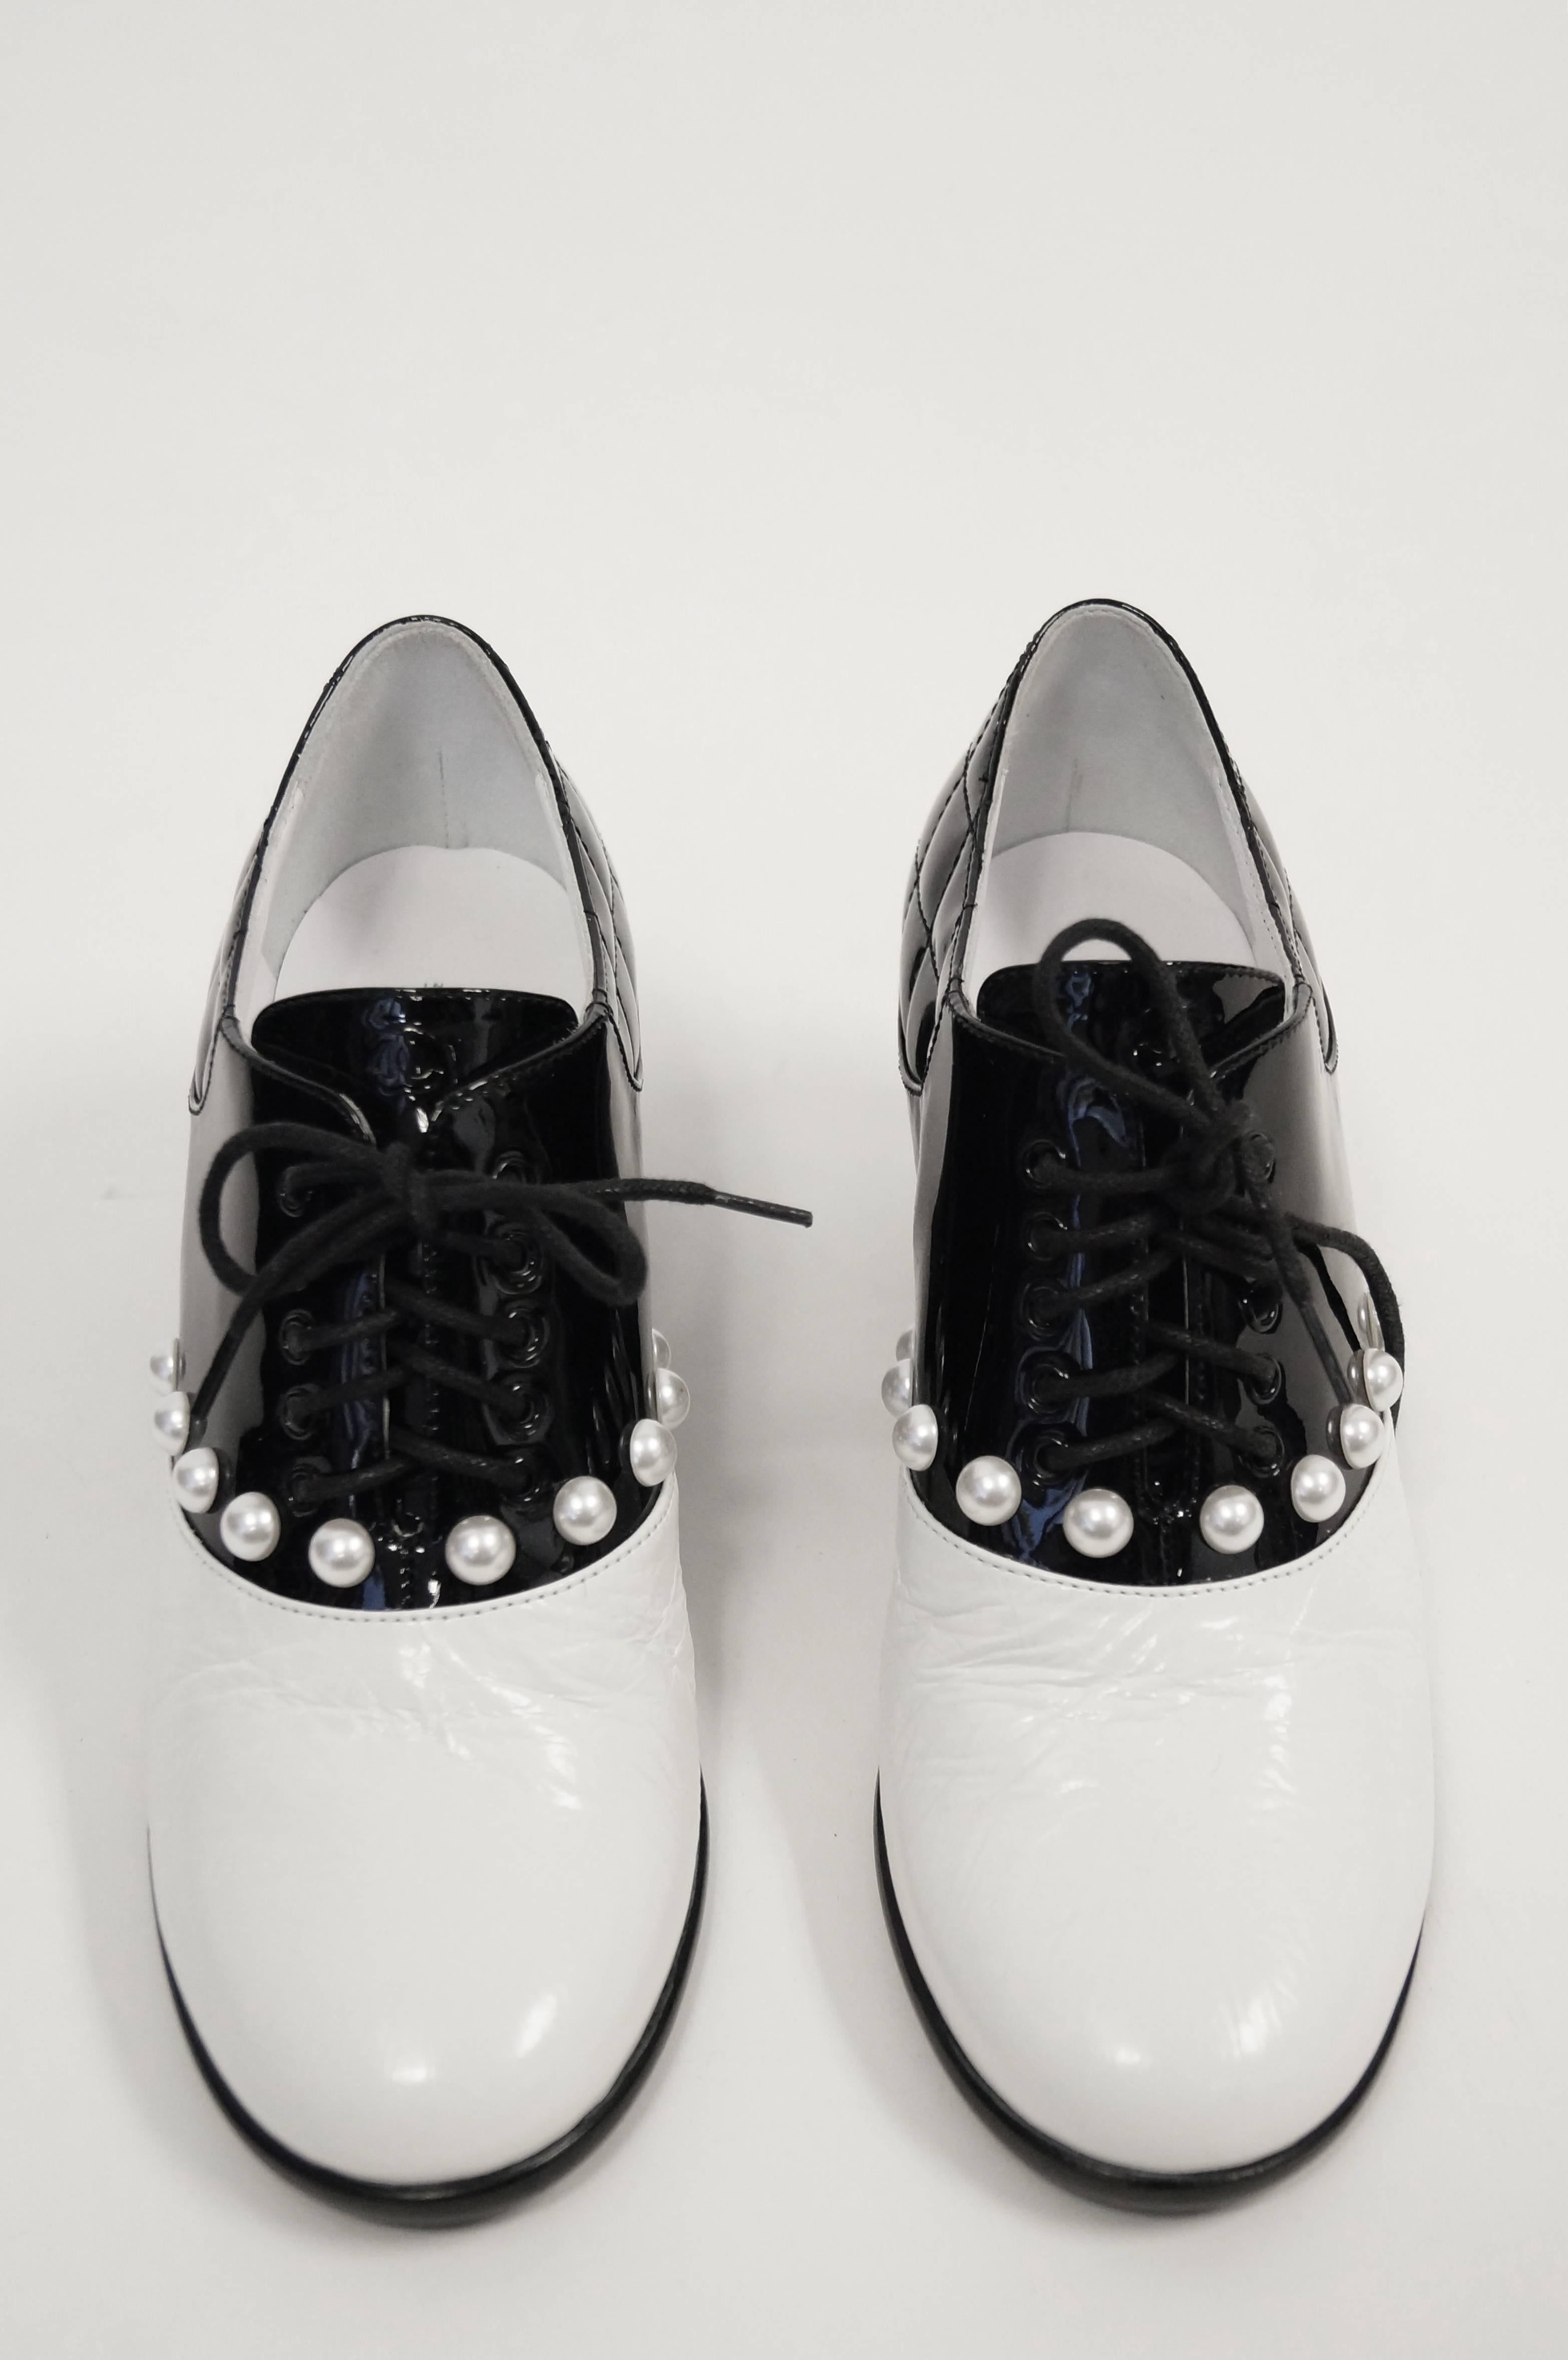 Iconic Chanel glossy patent leather black and white oxfords from the Pre-Fall 2014 